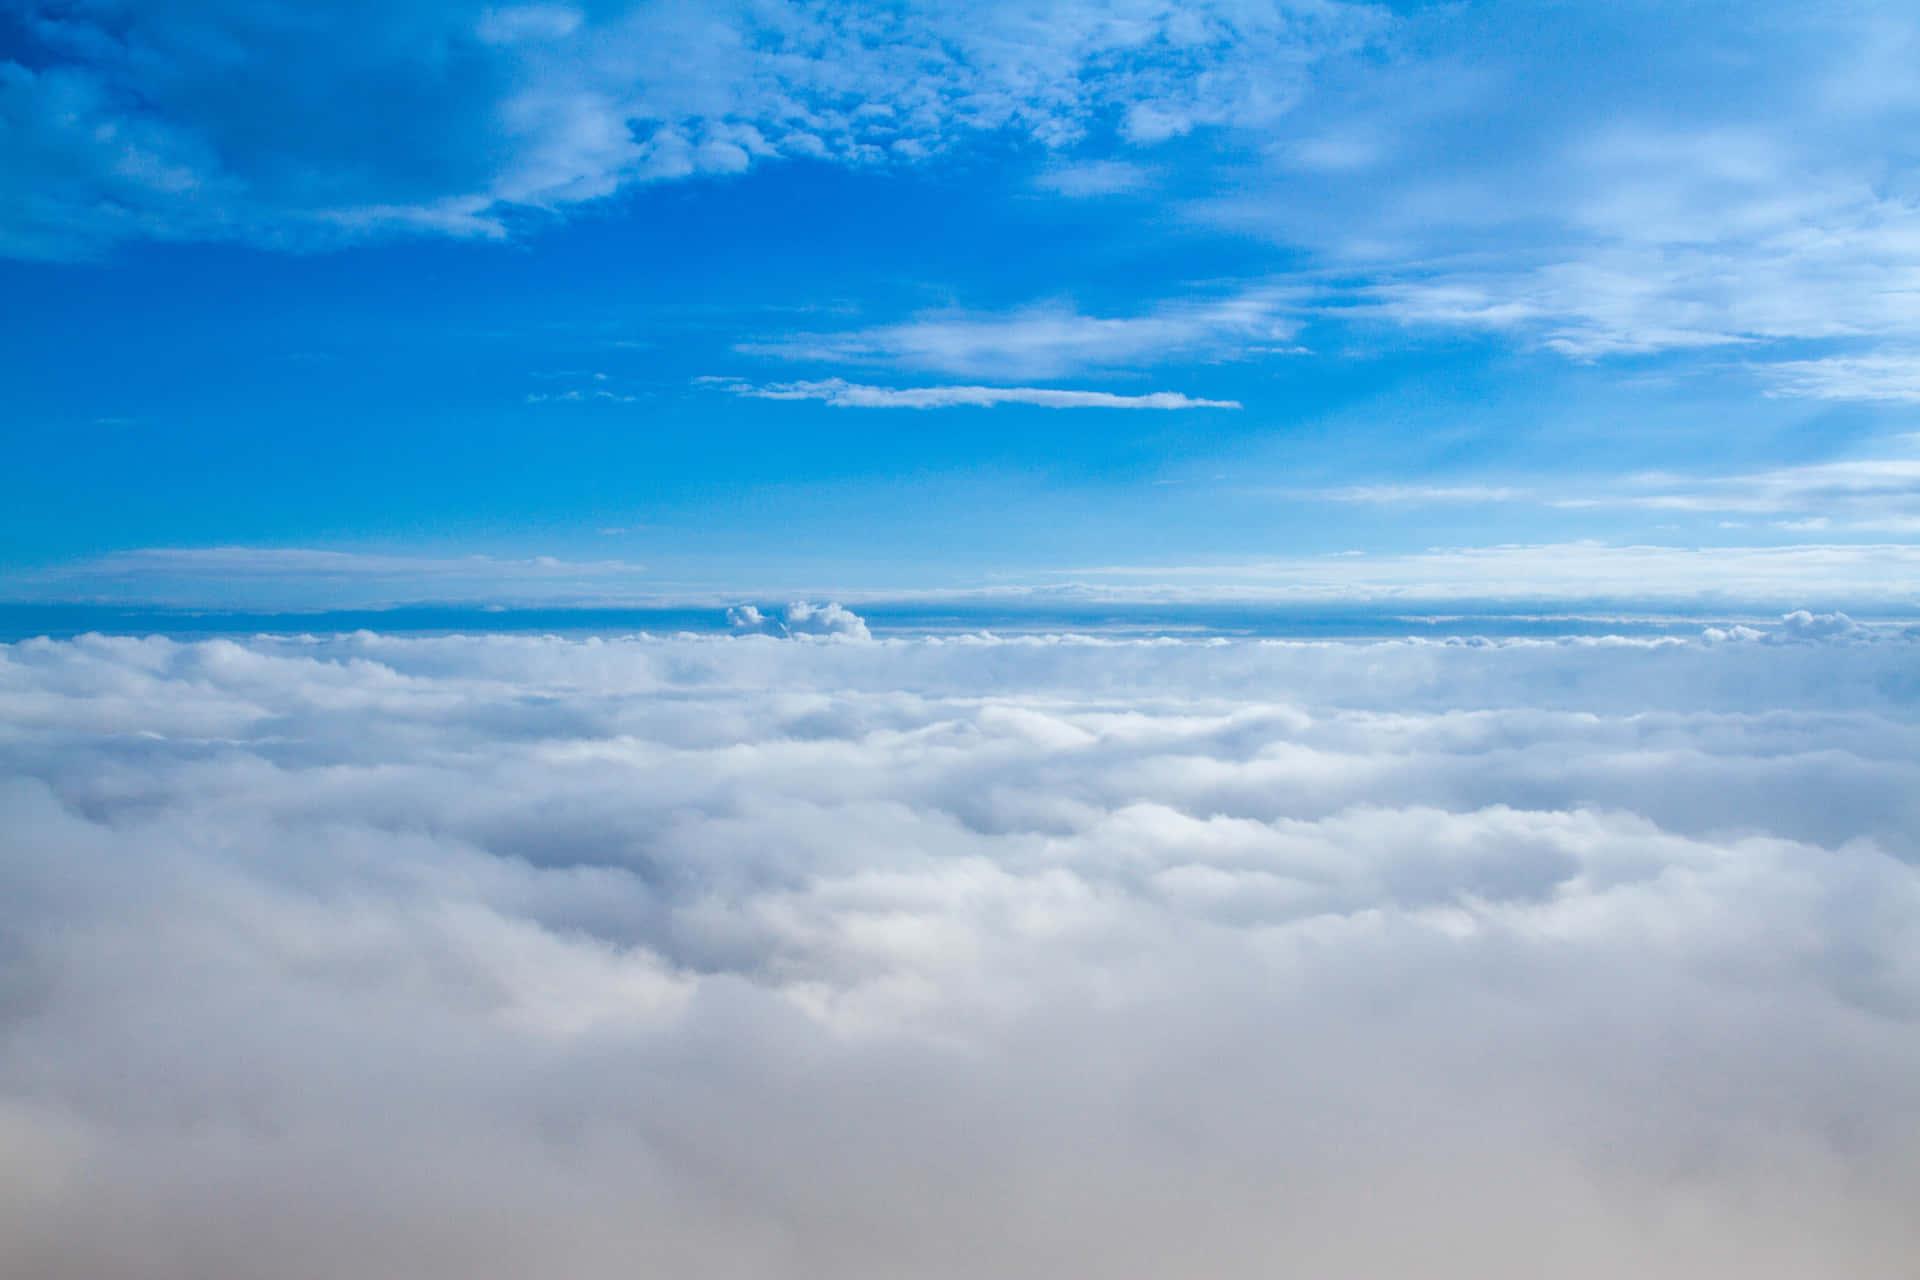 Breath taking view of the sky and clouds from the peak of Mount Everest